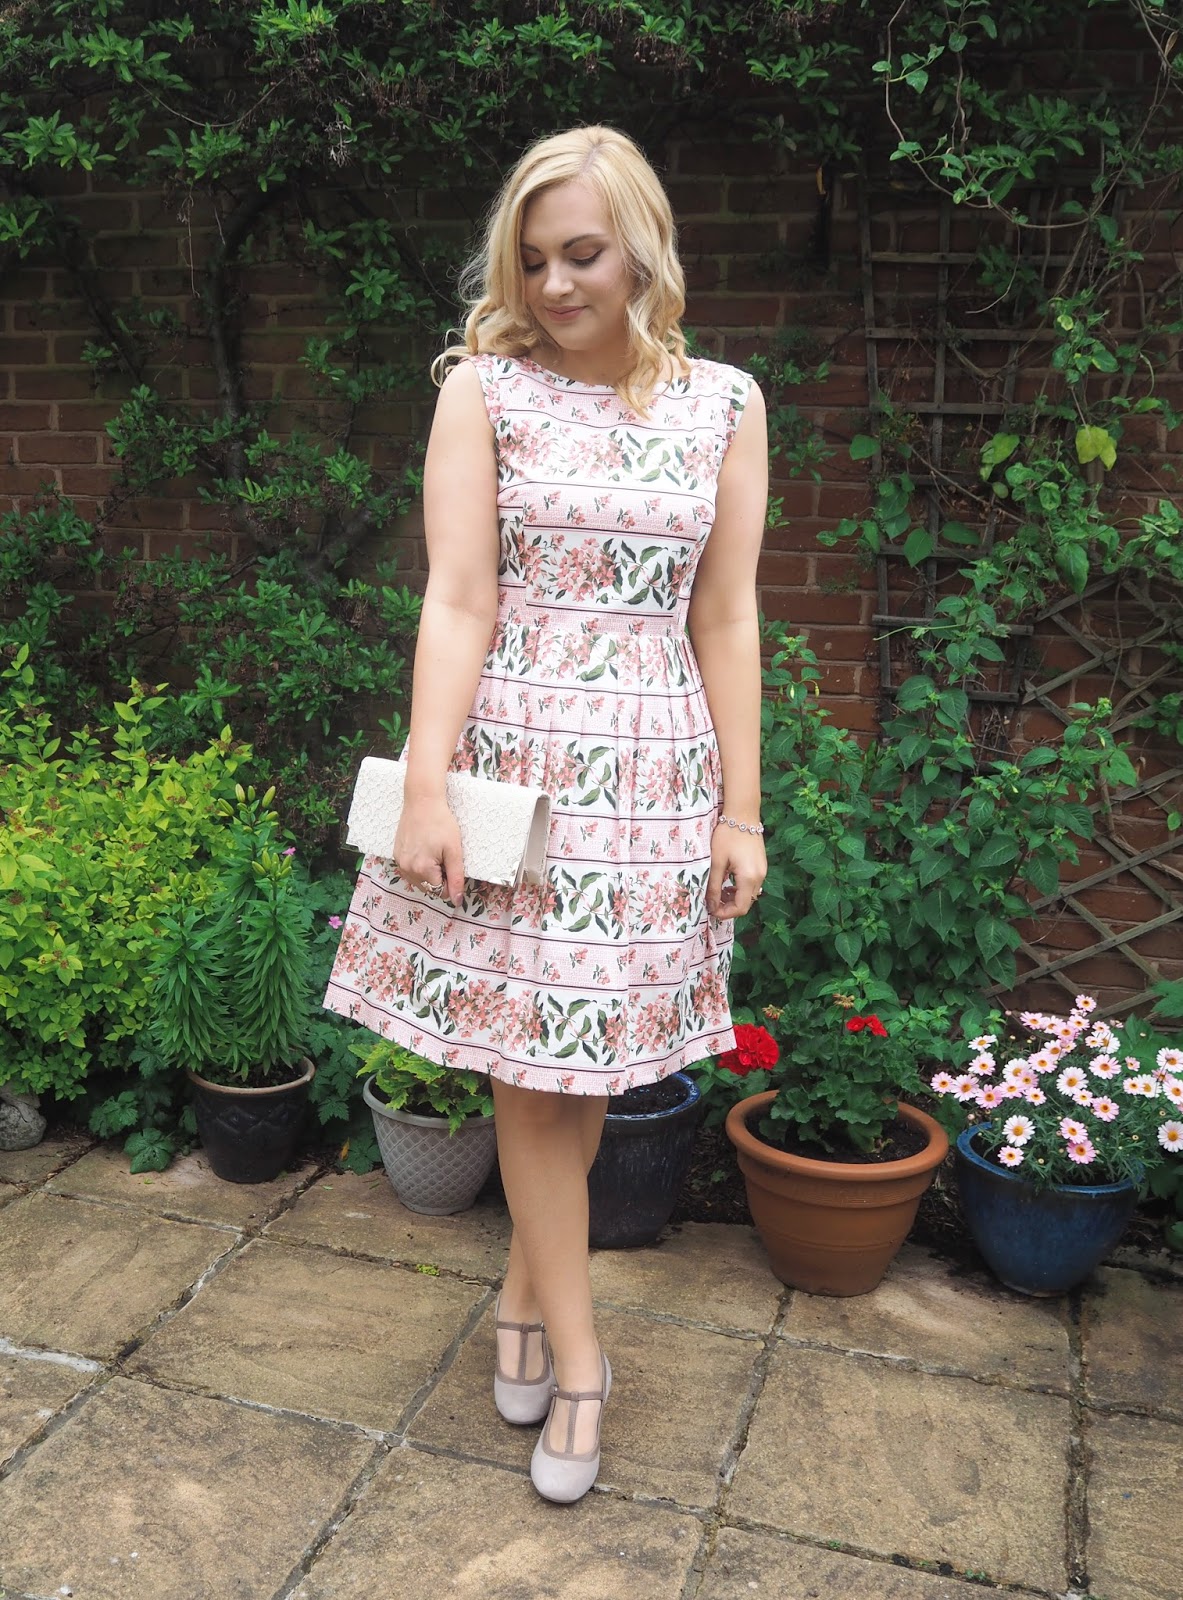 Wedding Guest Outfit Ideas, Katie Kirk Loves, UK Blogger, Wedding Outfit, Oasis Fashion, Pink Princess Dress, Hotter Shoes, Comfortable Heels, Fashion Blogger, Outfit Blogger, Style Blogger, Fashion Influencer, Style Influencer, Wedding Inspiration, Wedding Style